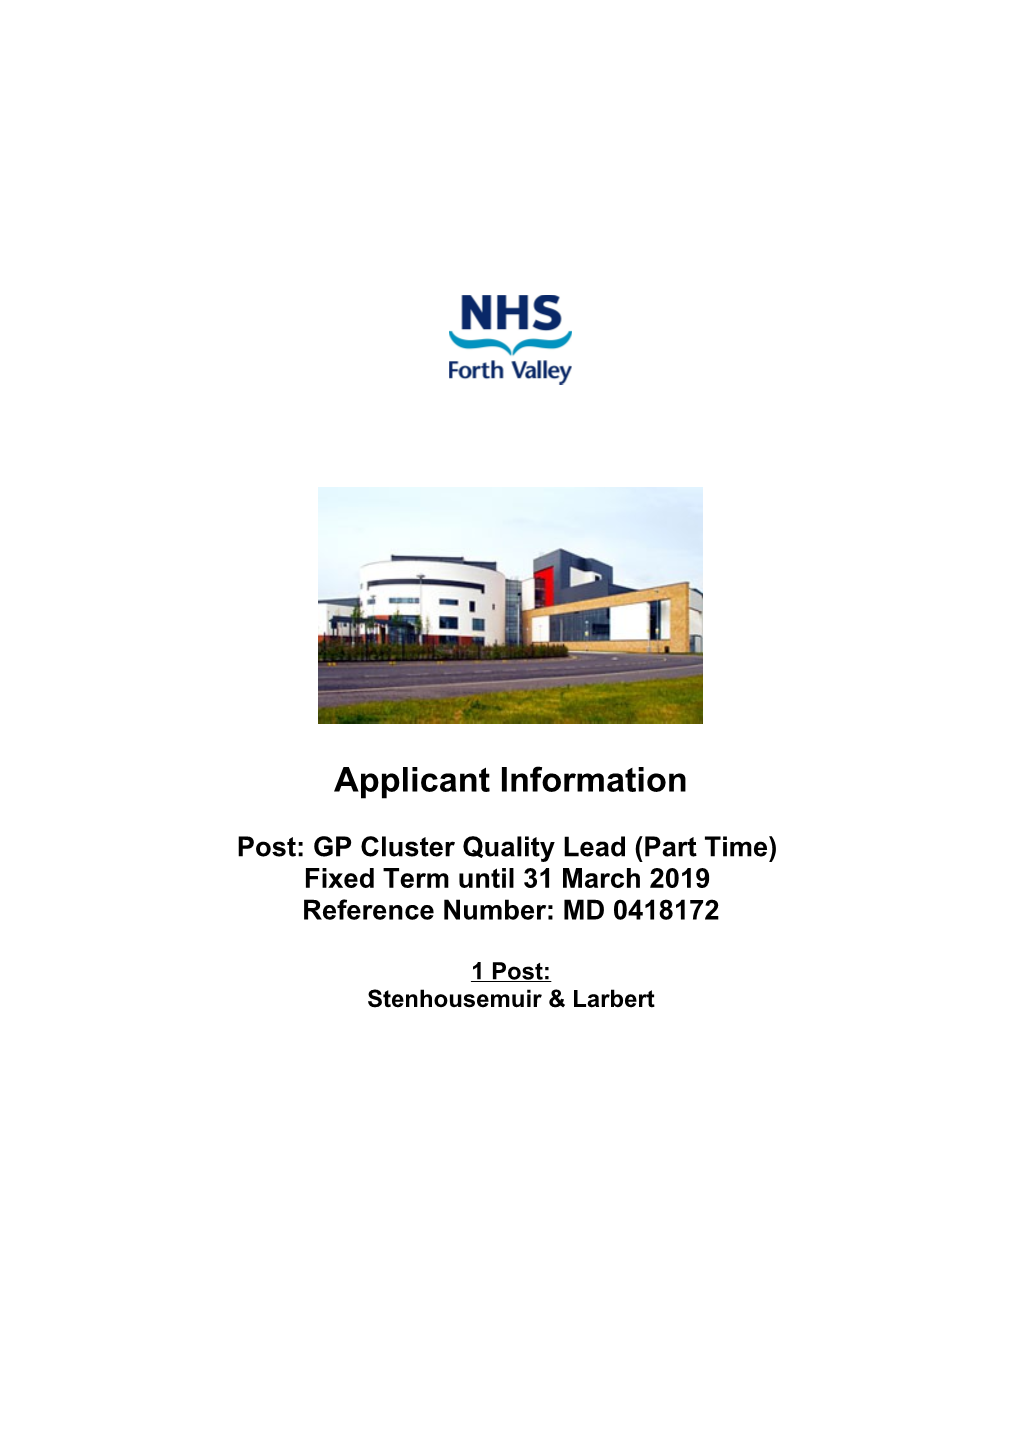 Post:GP Cluster Quality Lead(Part Time)